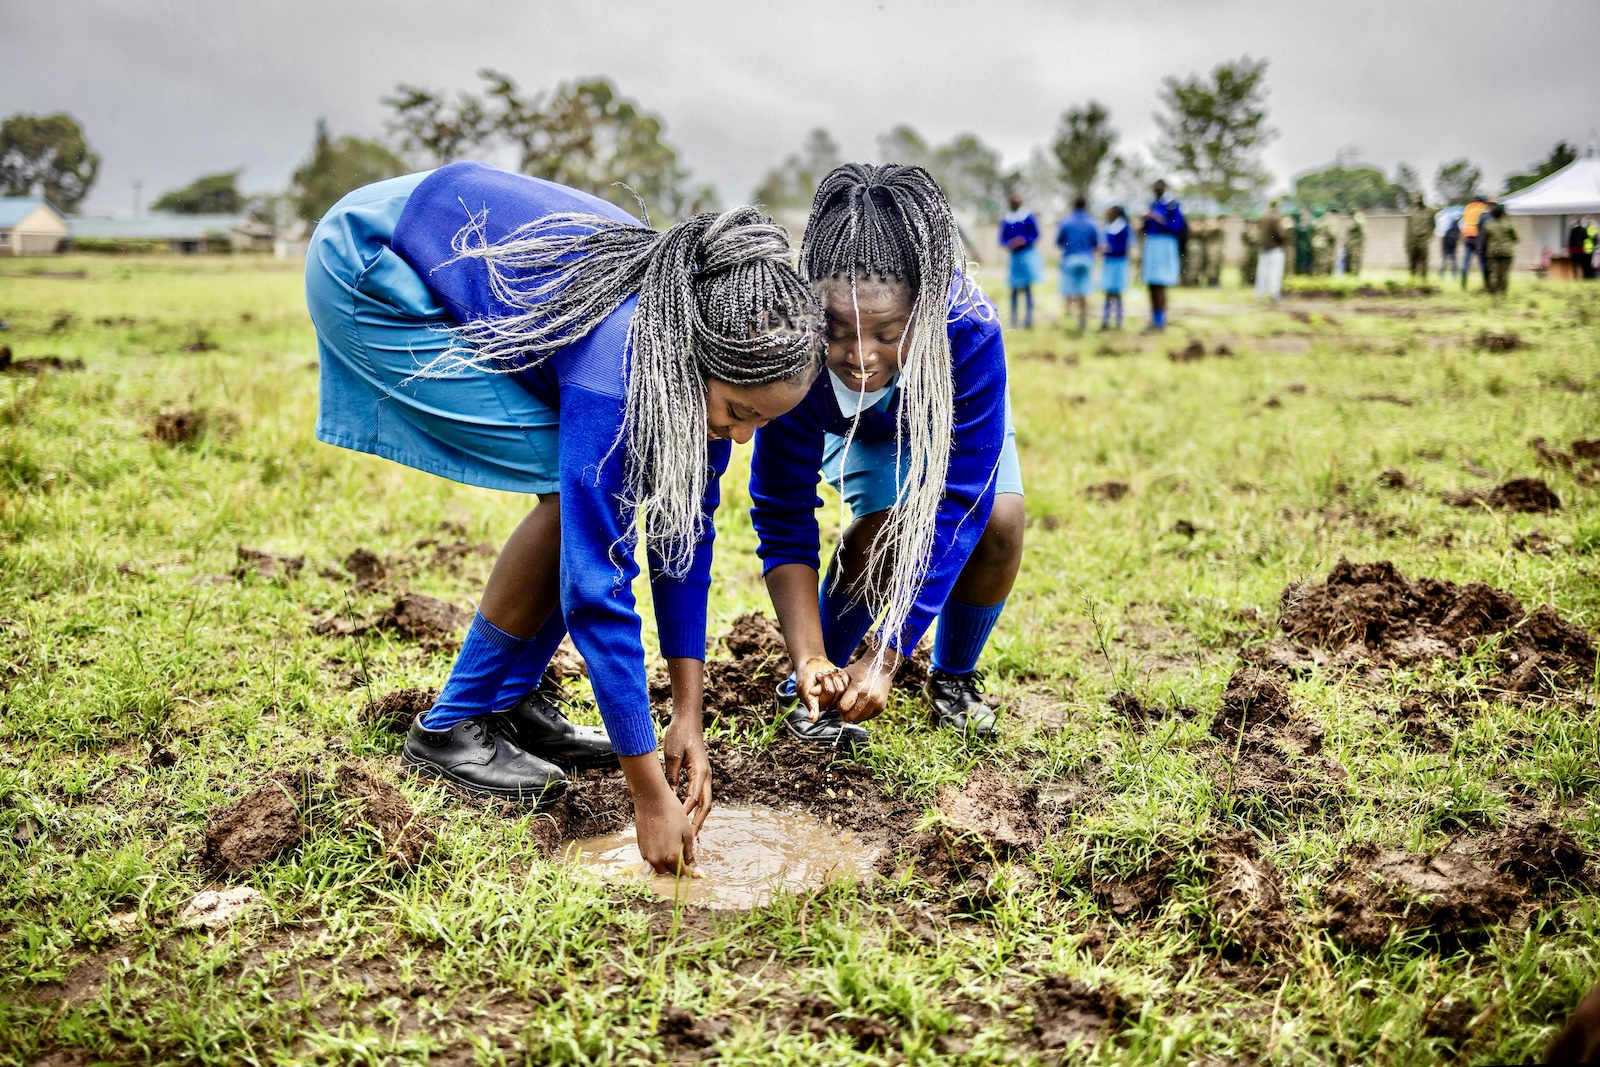 Students wash their hands on a puddle after planting tree seedlings nationwide tree planting public holiday in Nairobi kenya